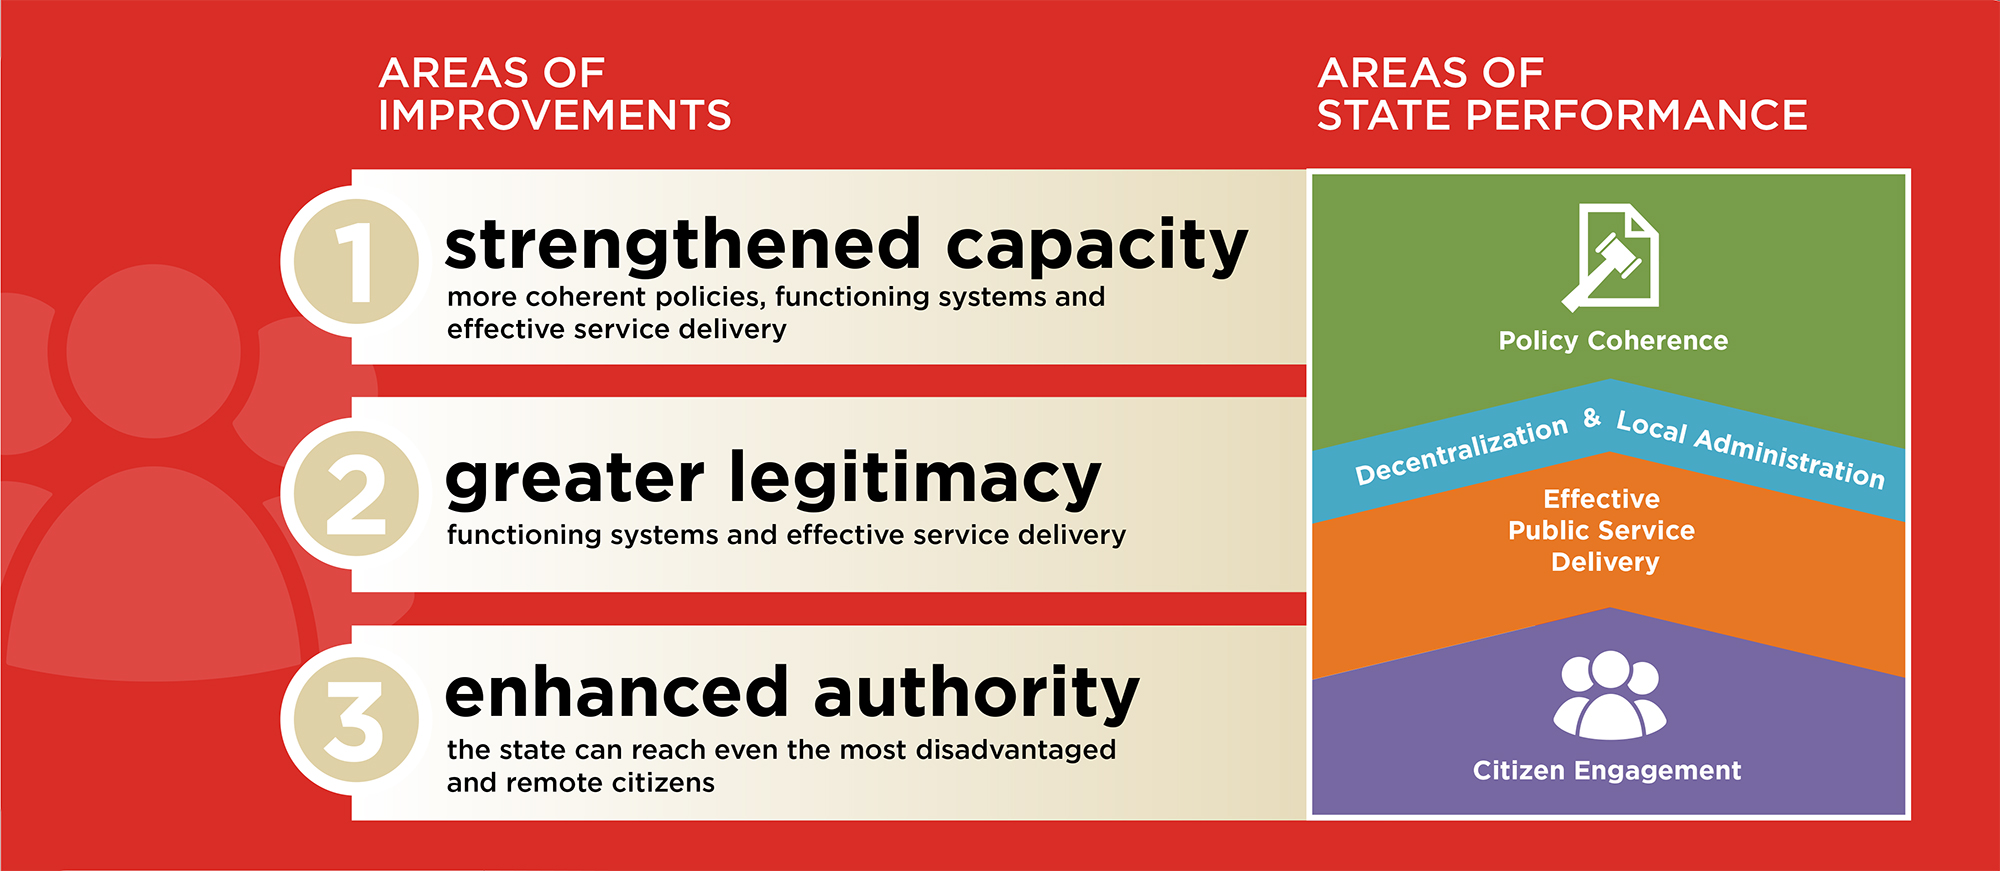 The Results of Governance Initiatives are Measured by Improvements in State Performance